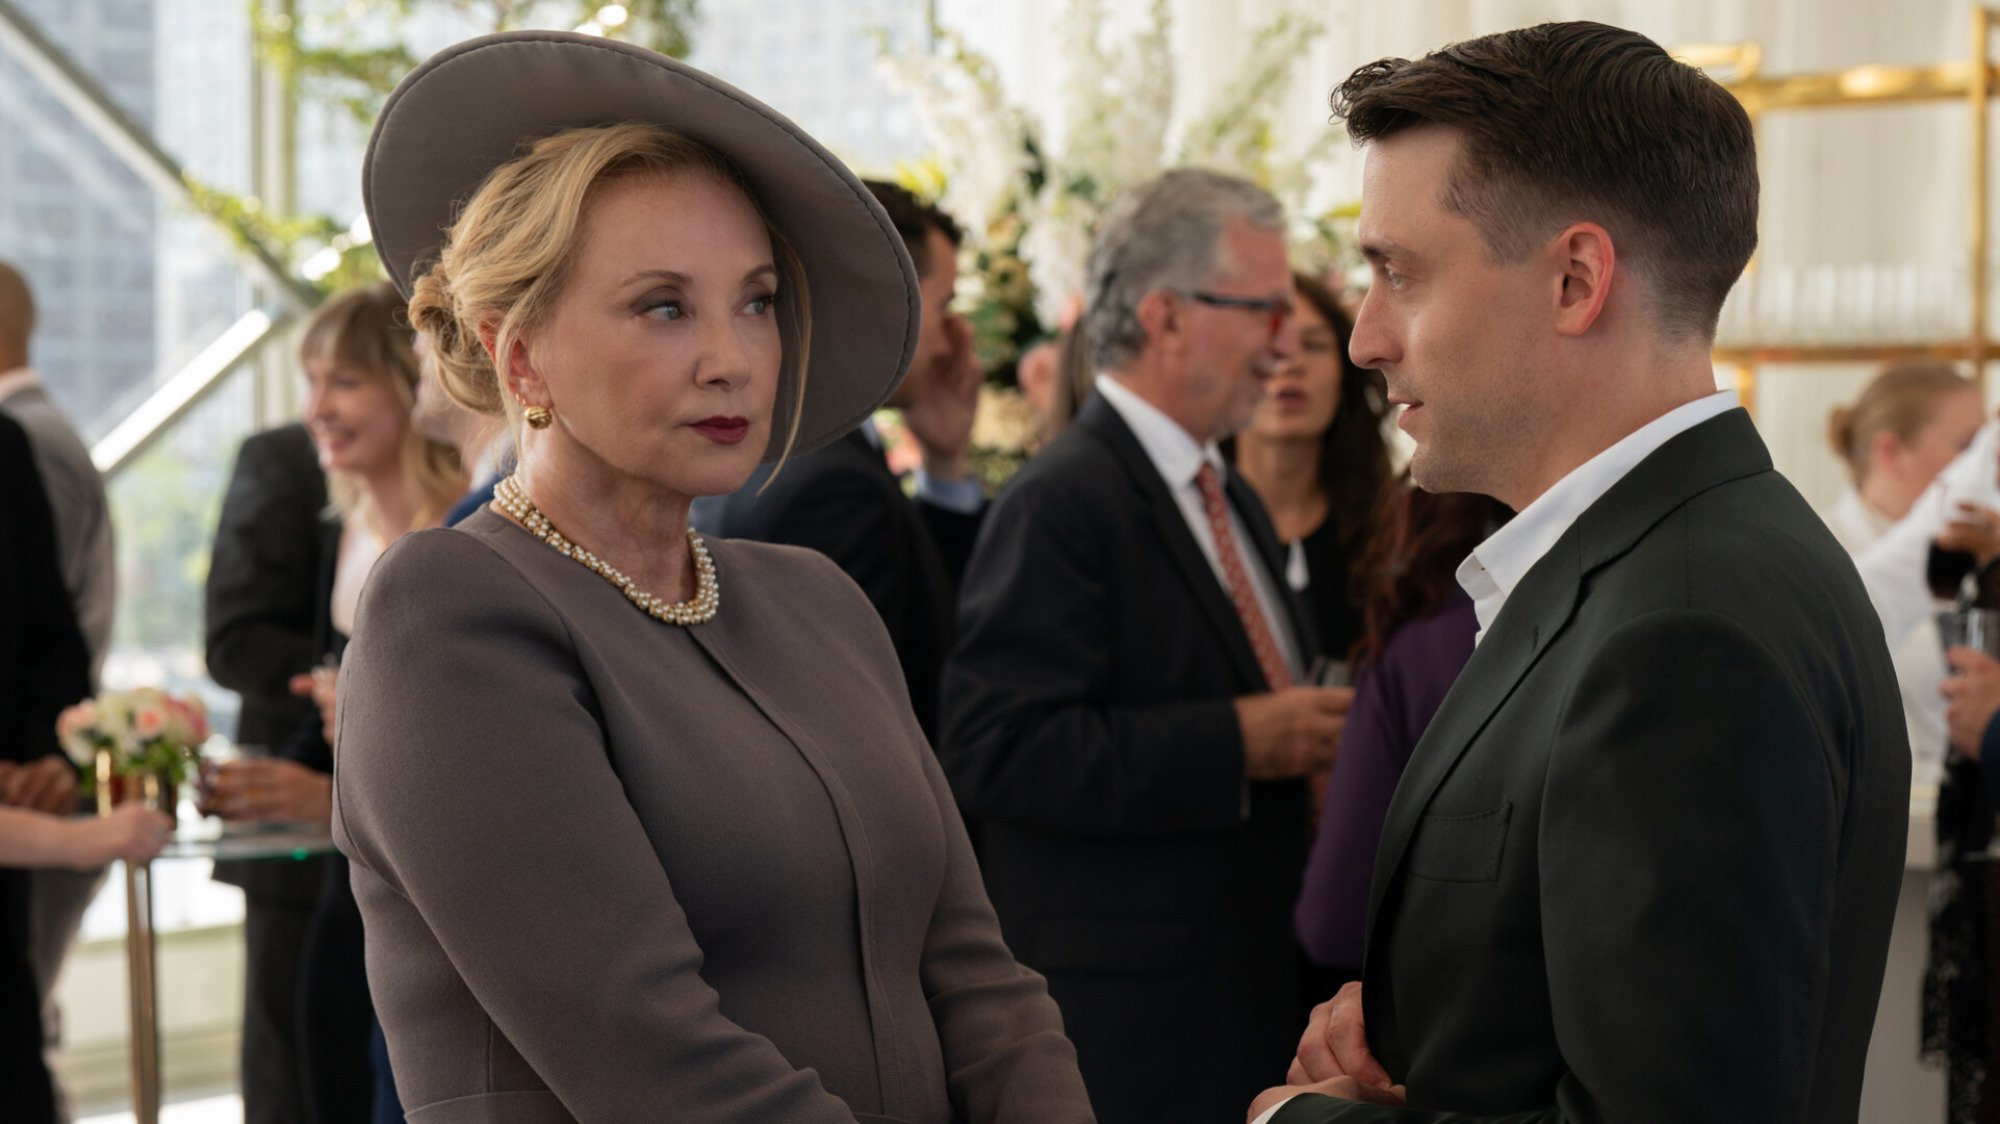 A woman wearing a grey dress and hat, and a man wearing a suit, talk at an upscale function. 